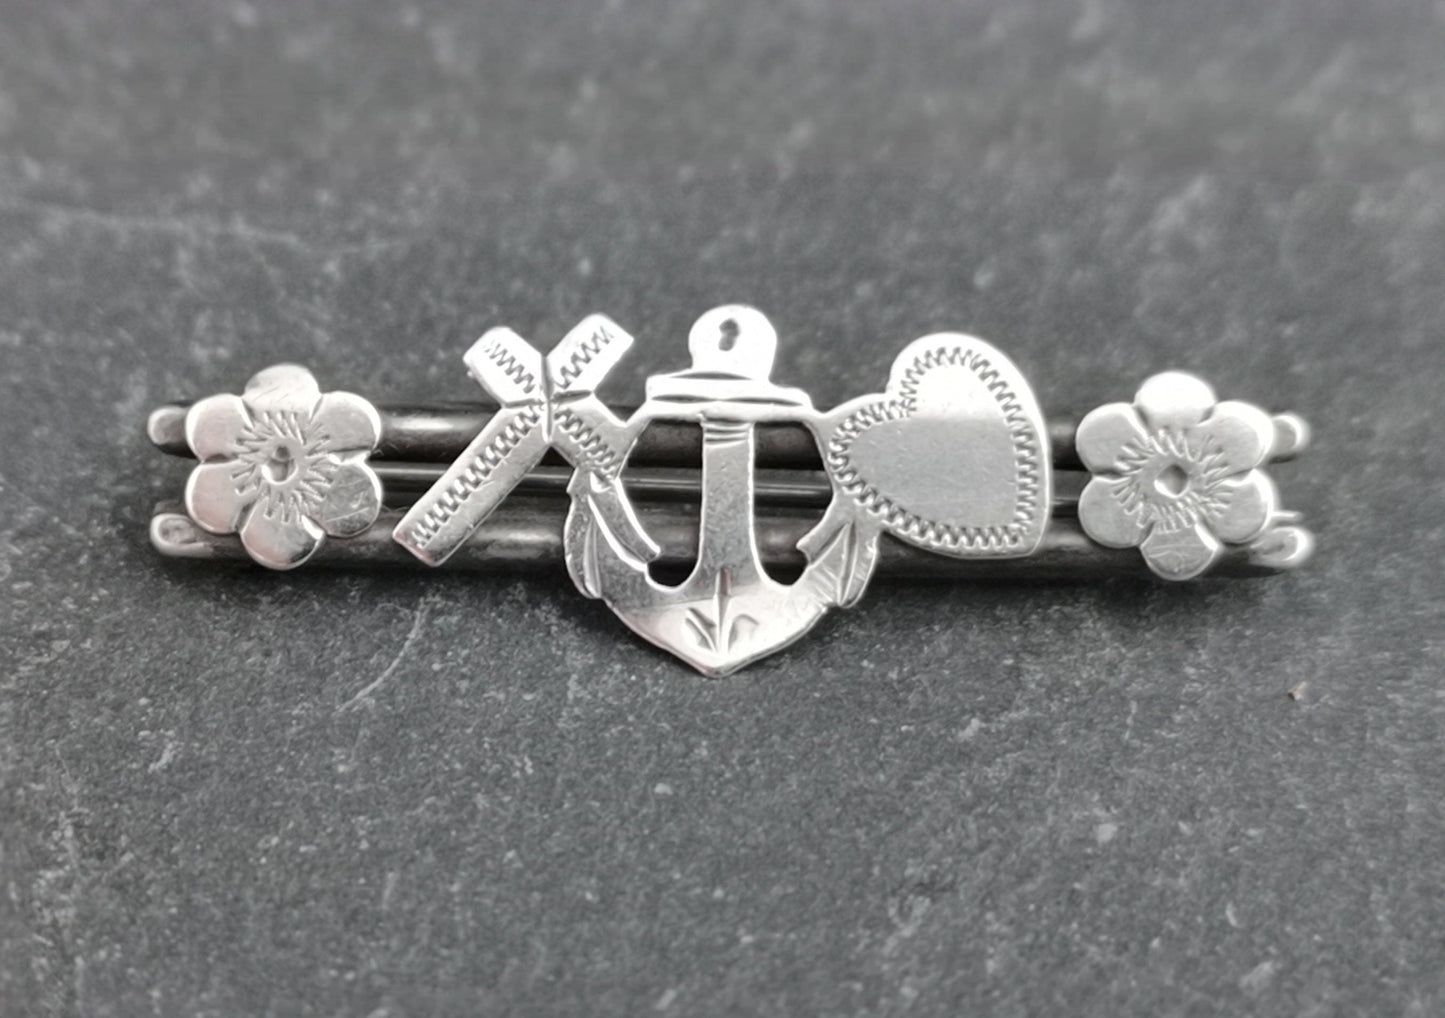 Antique faith, hope and charity brooch, Edwardian sterling silver